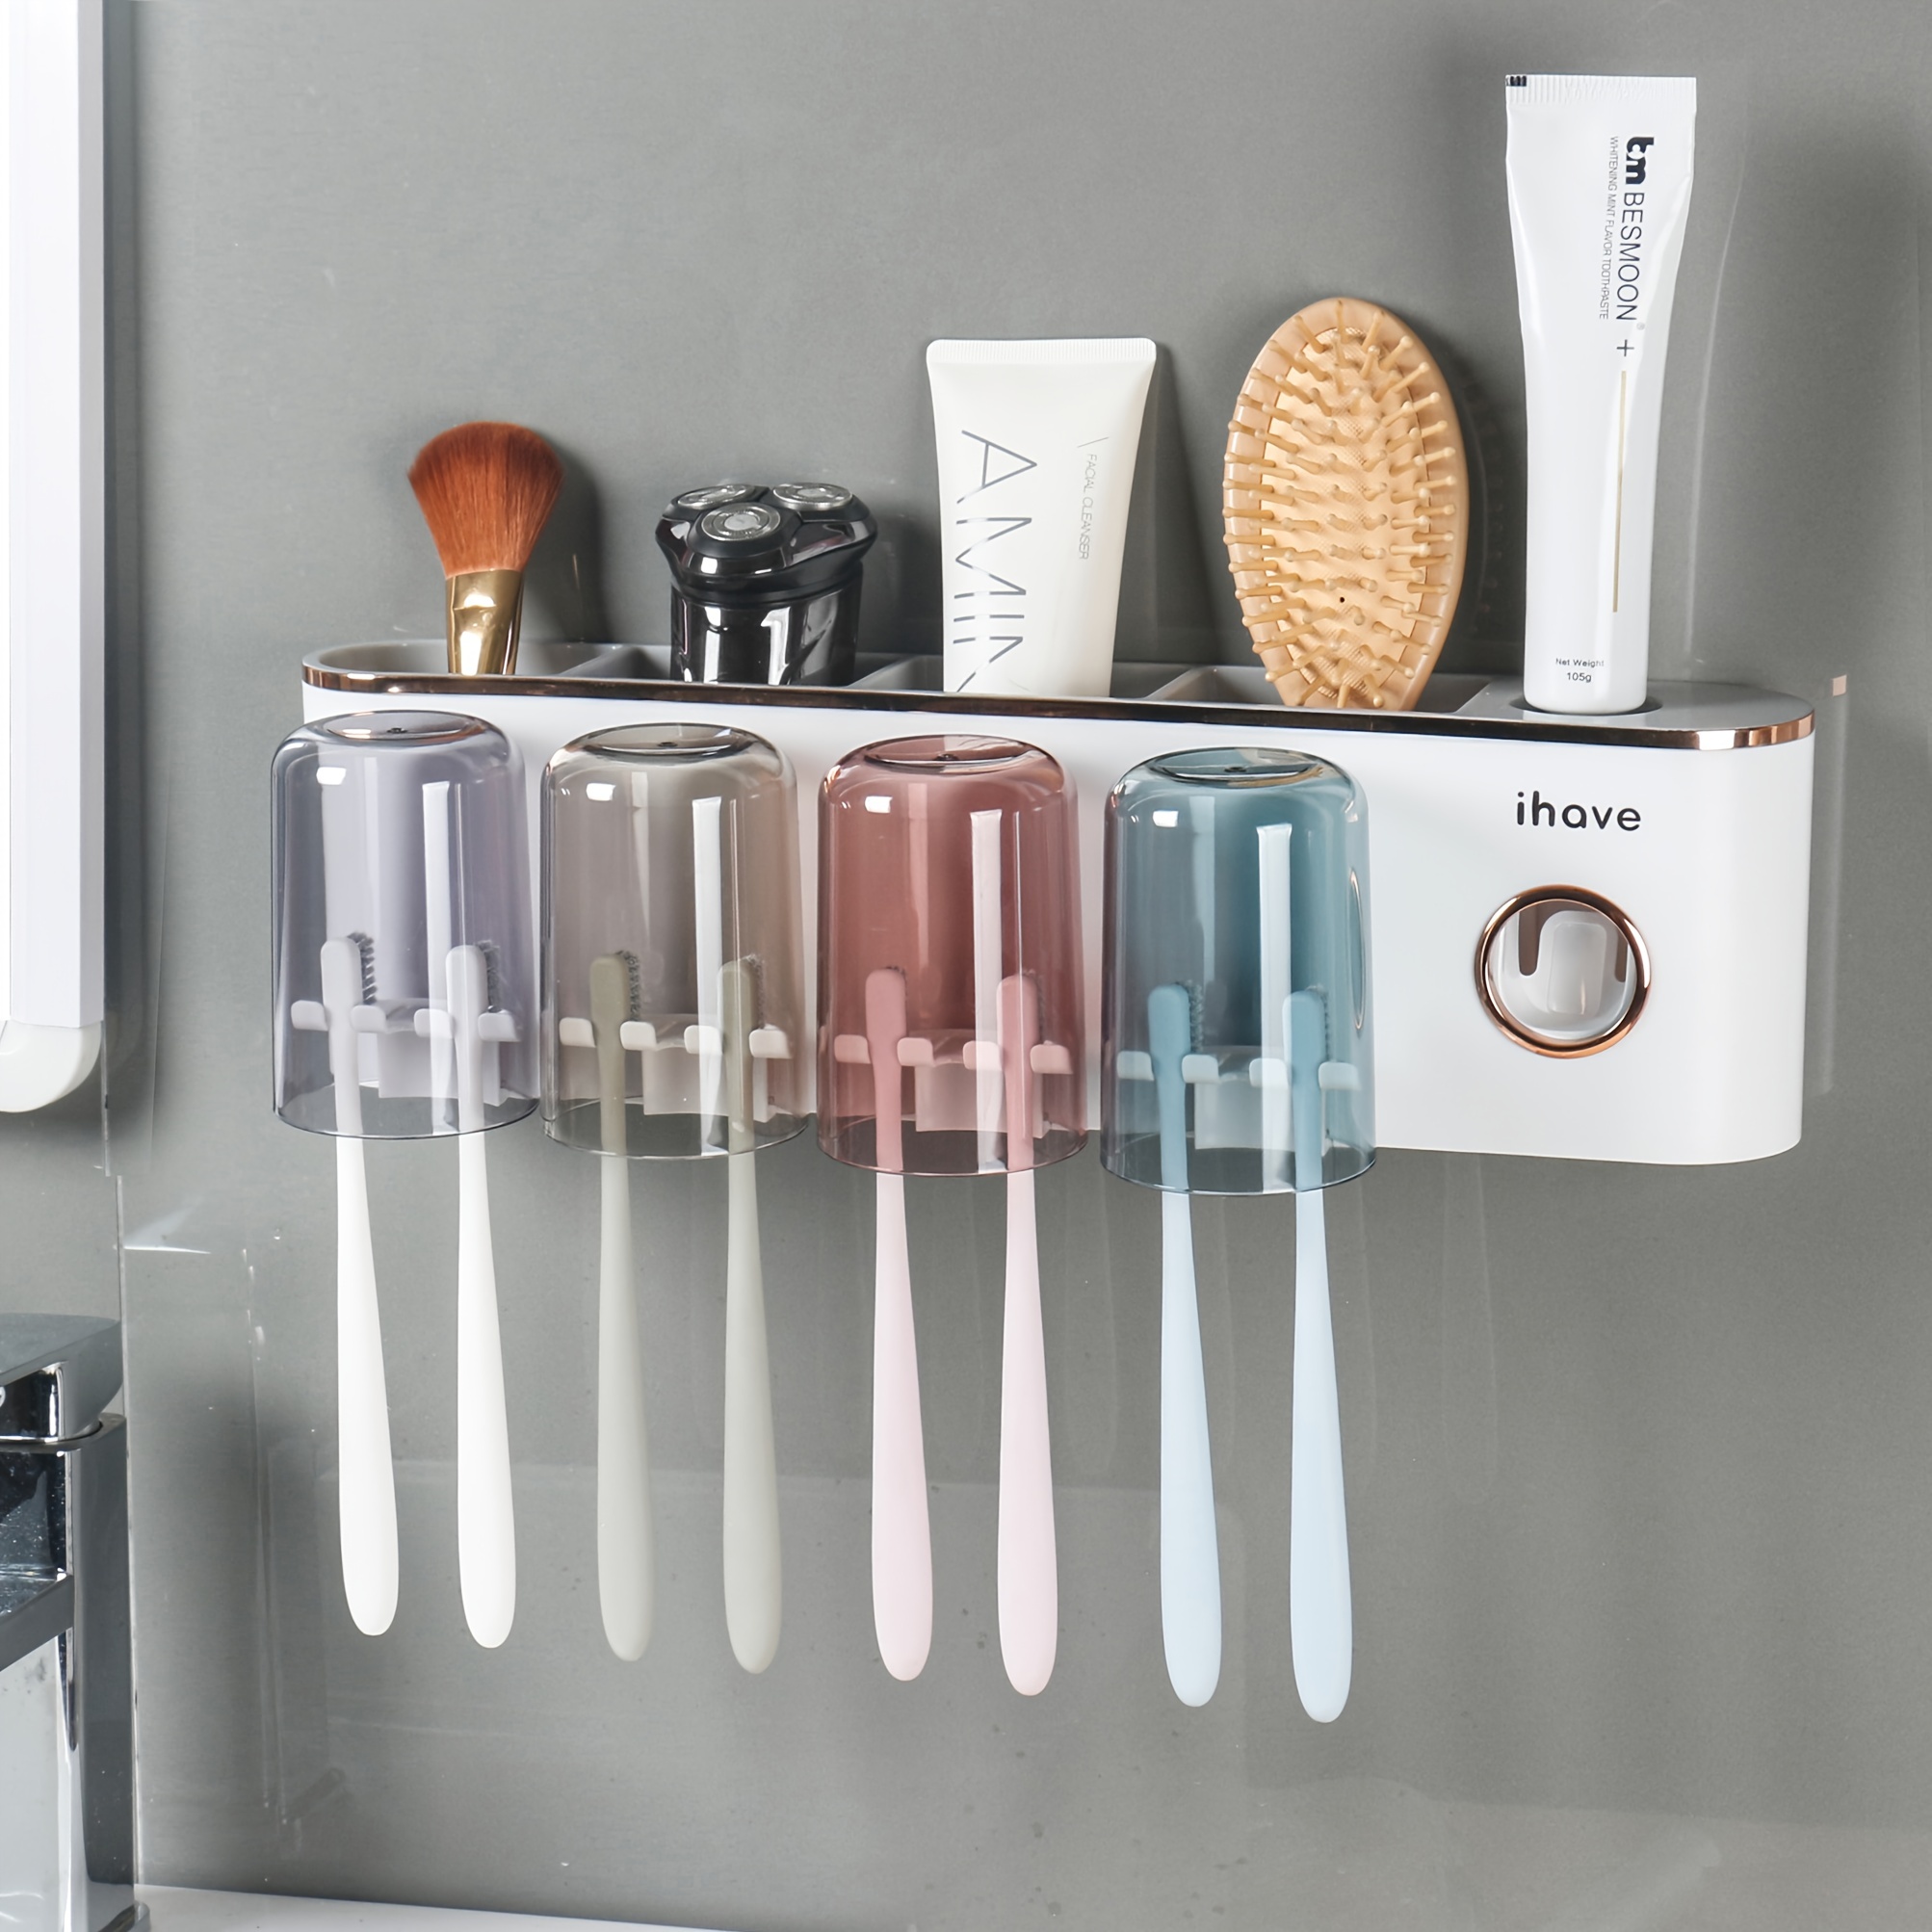 iHave Toothbrush Holders for Bathrooms, 4 Cups Toothbrush Holder Wall  Mounted with Toothpaste Dispenser - Large Capacity Tray, 2 Cosmetic Drawer  